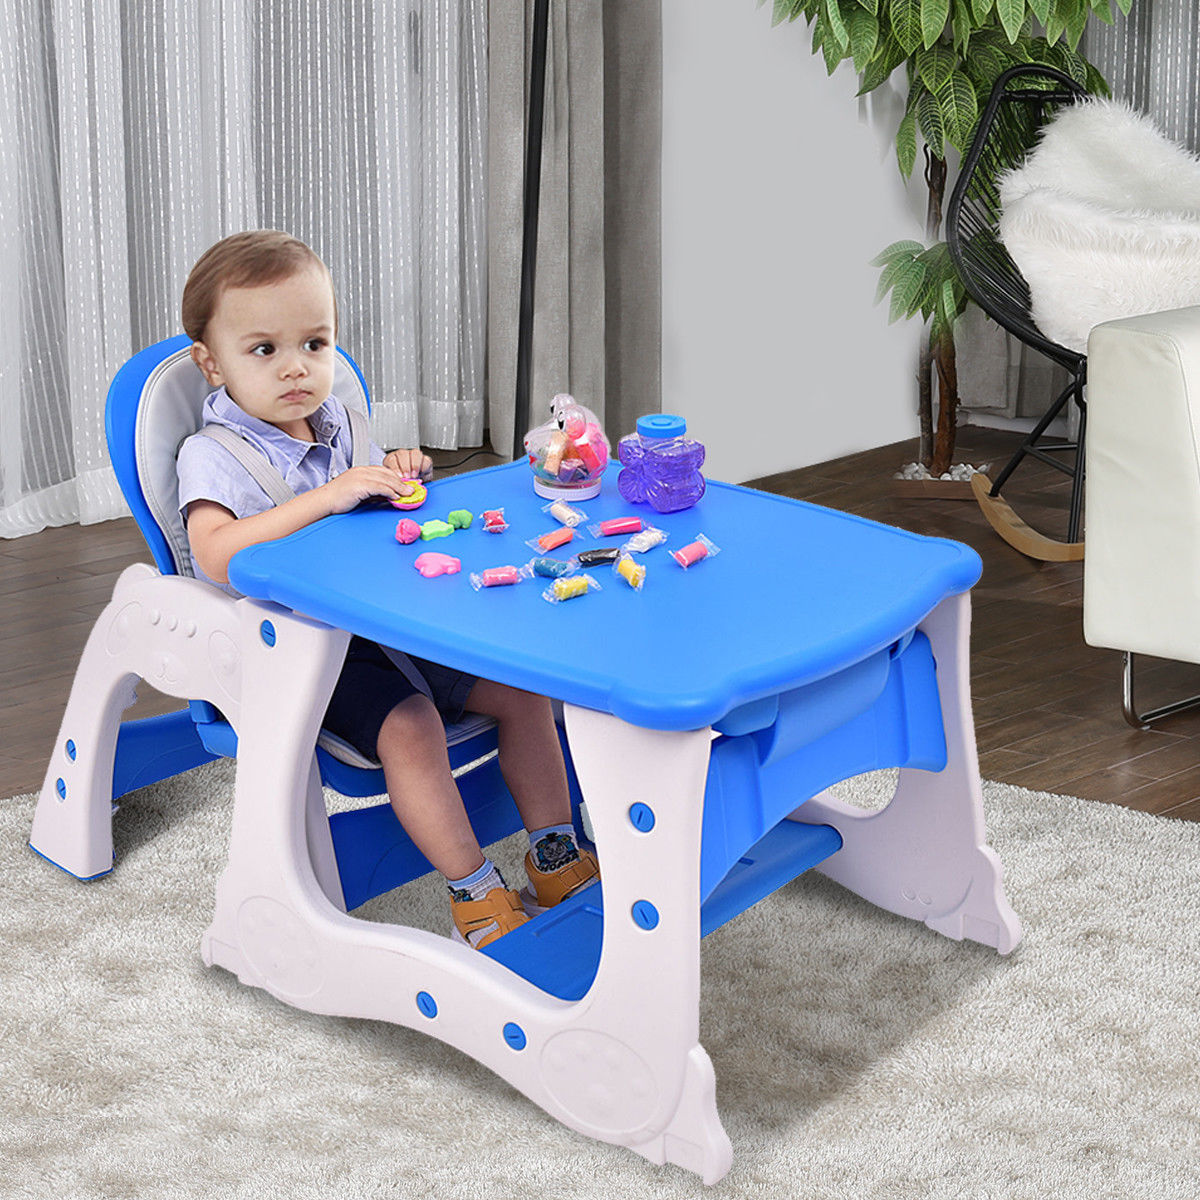 3 in 1 baby high chair convertible play table